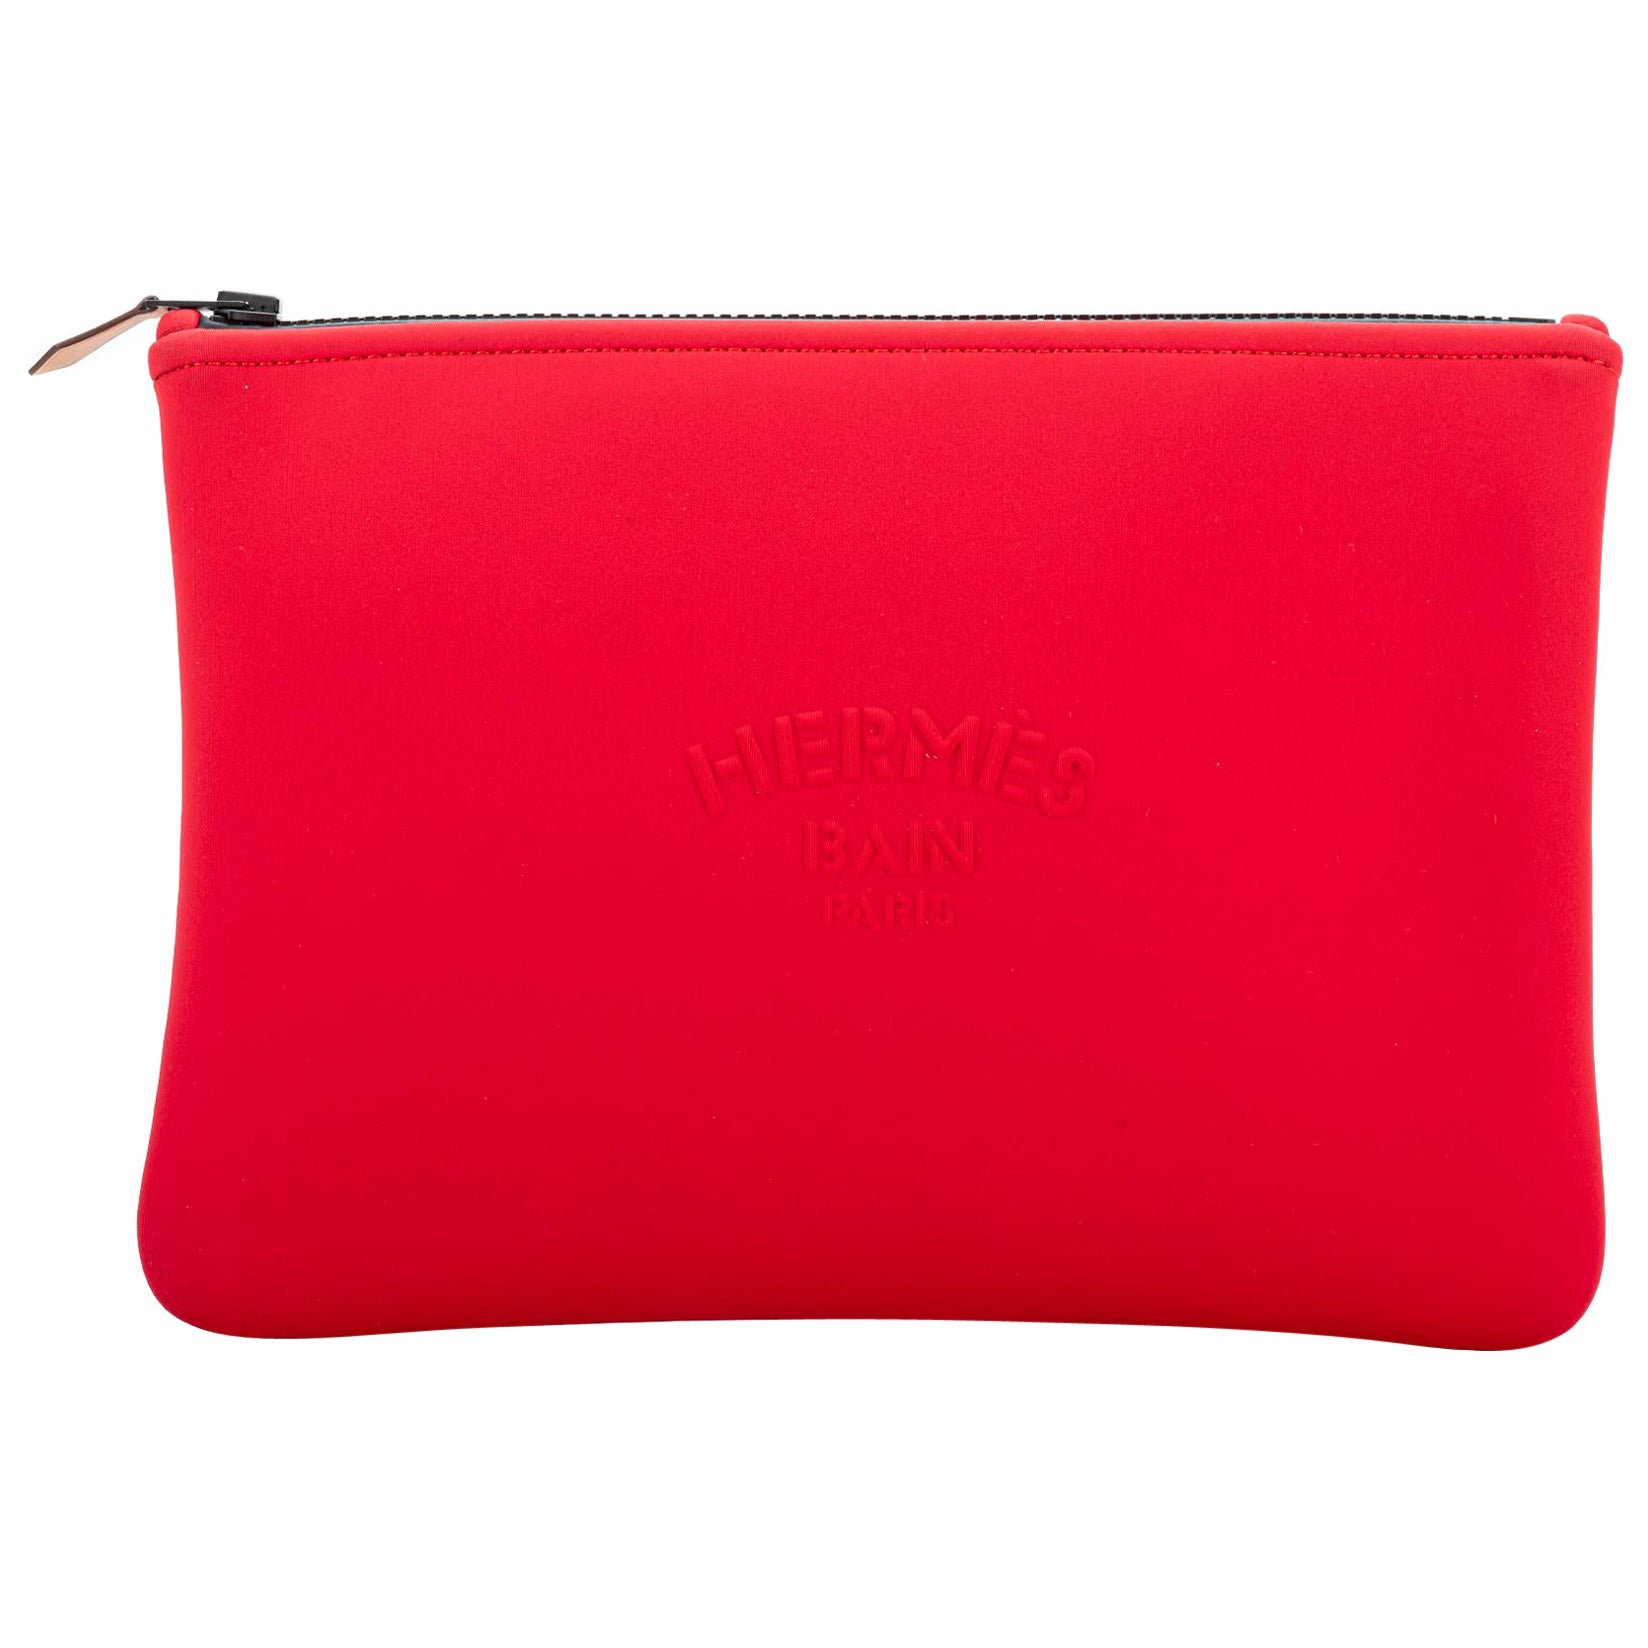 Hermès New Coral Neoprene Pouch For Sale